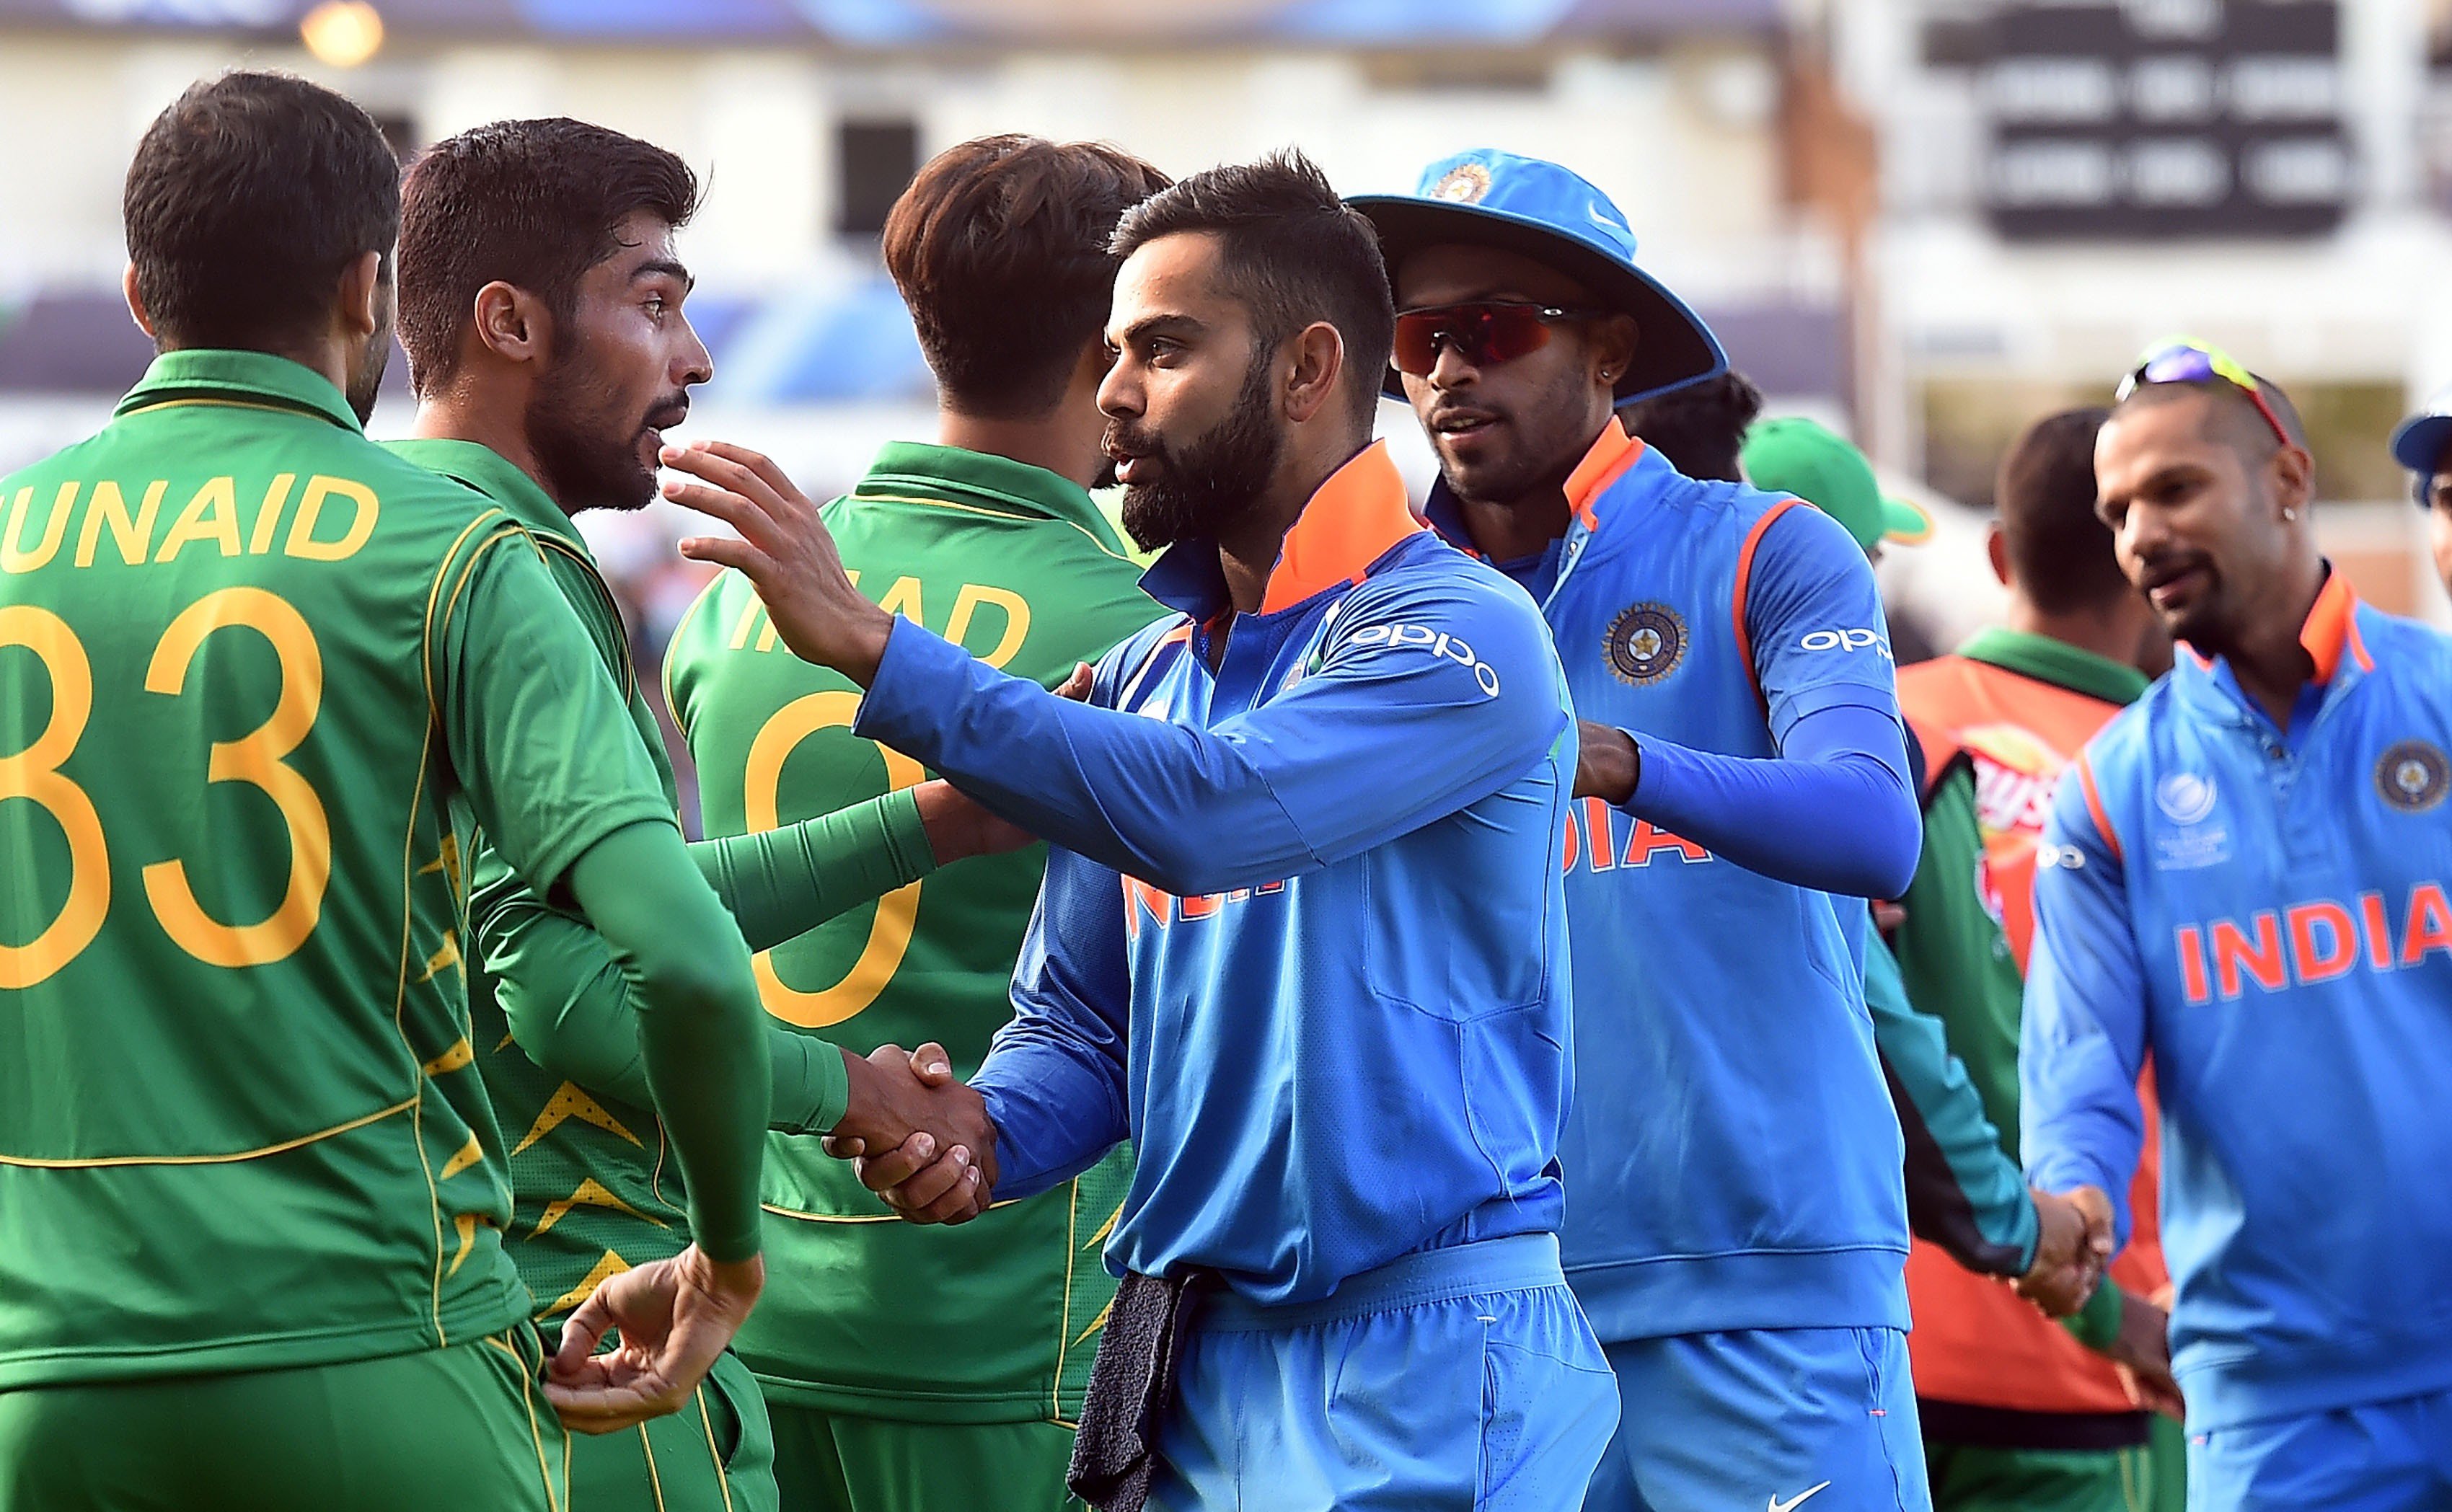 India captain Virat Kohli shakes hands with Pakistan players after their ICC Champions Trophy match. Photo: AFP